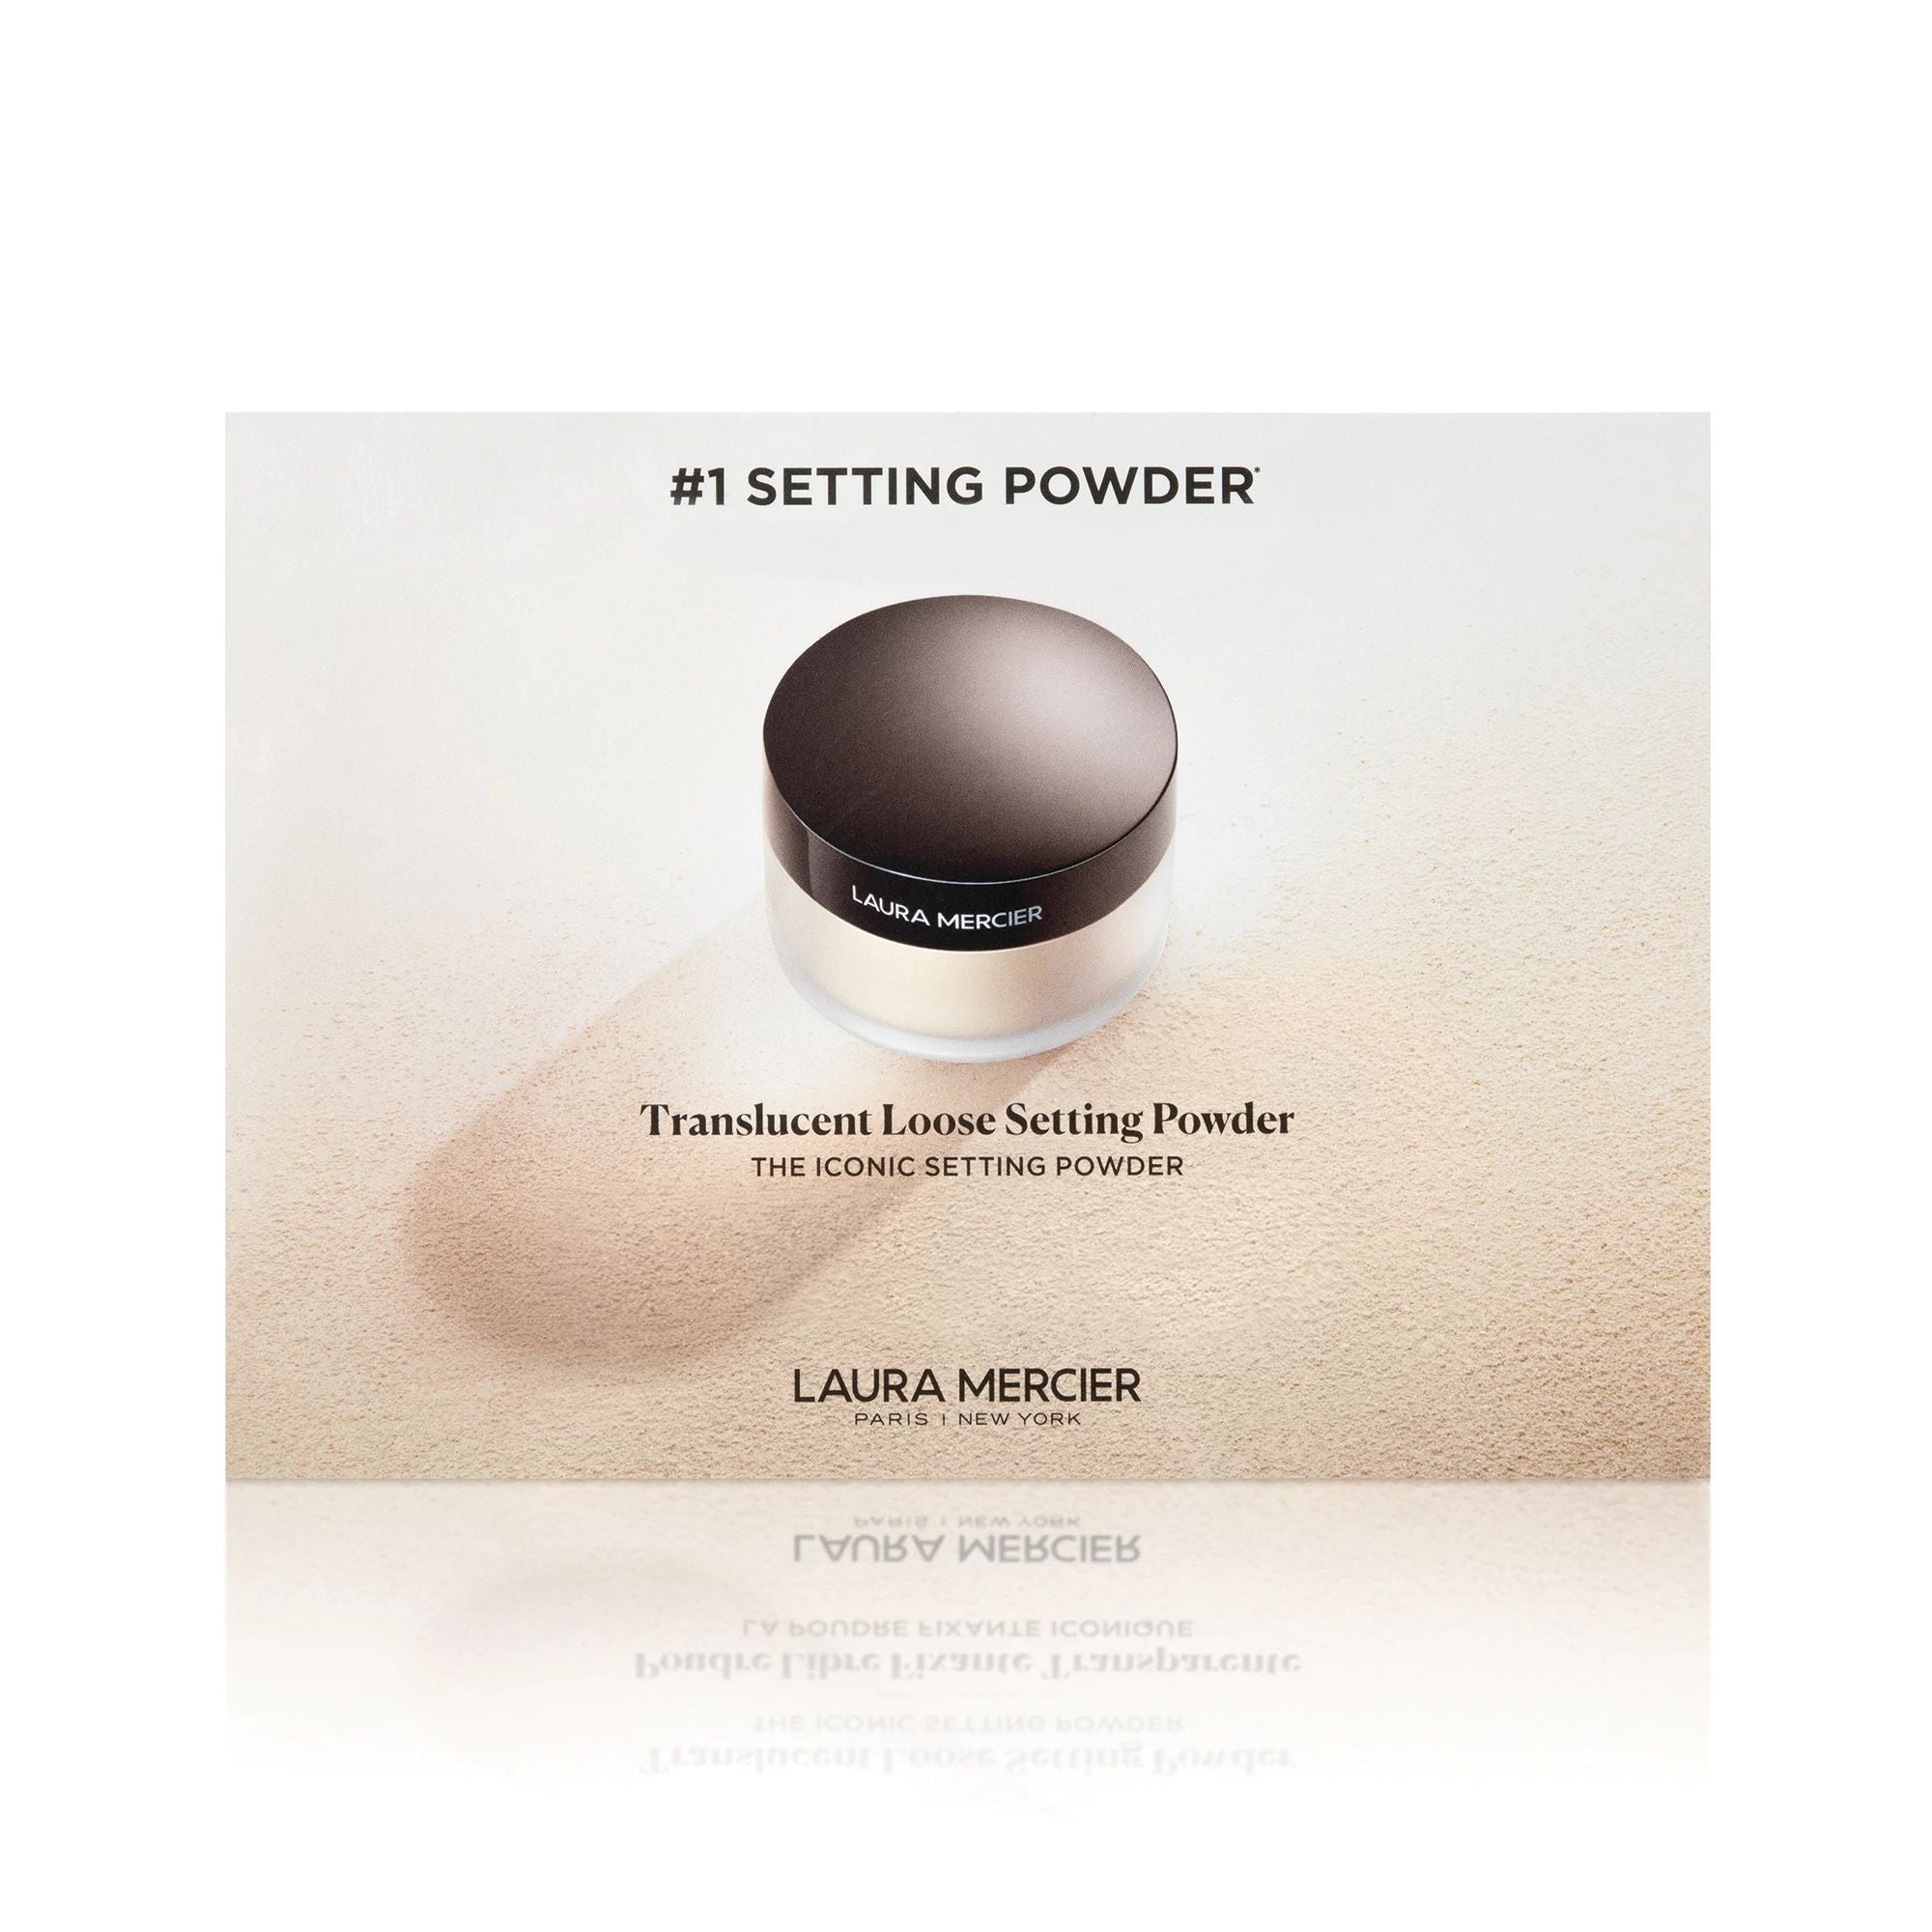 #1 Setting Powder - Translucent Loose Setting Powder - Packette Sample View 1